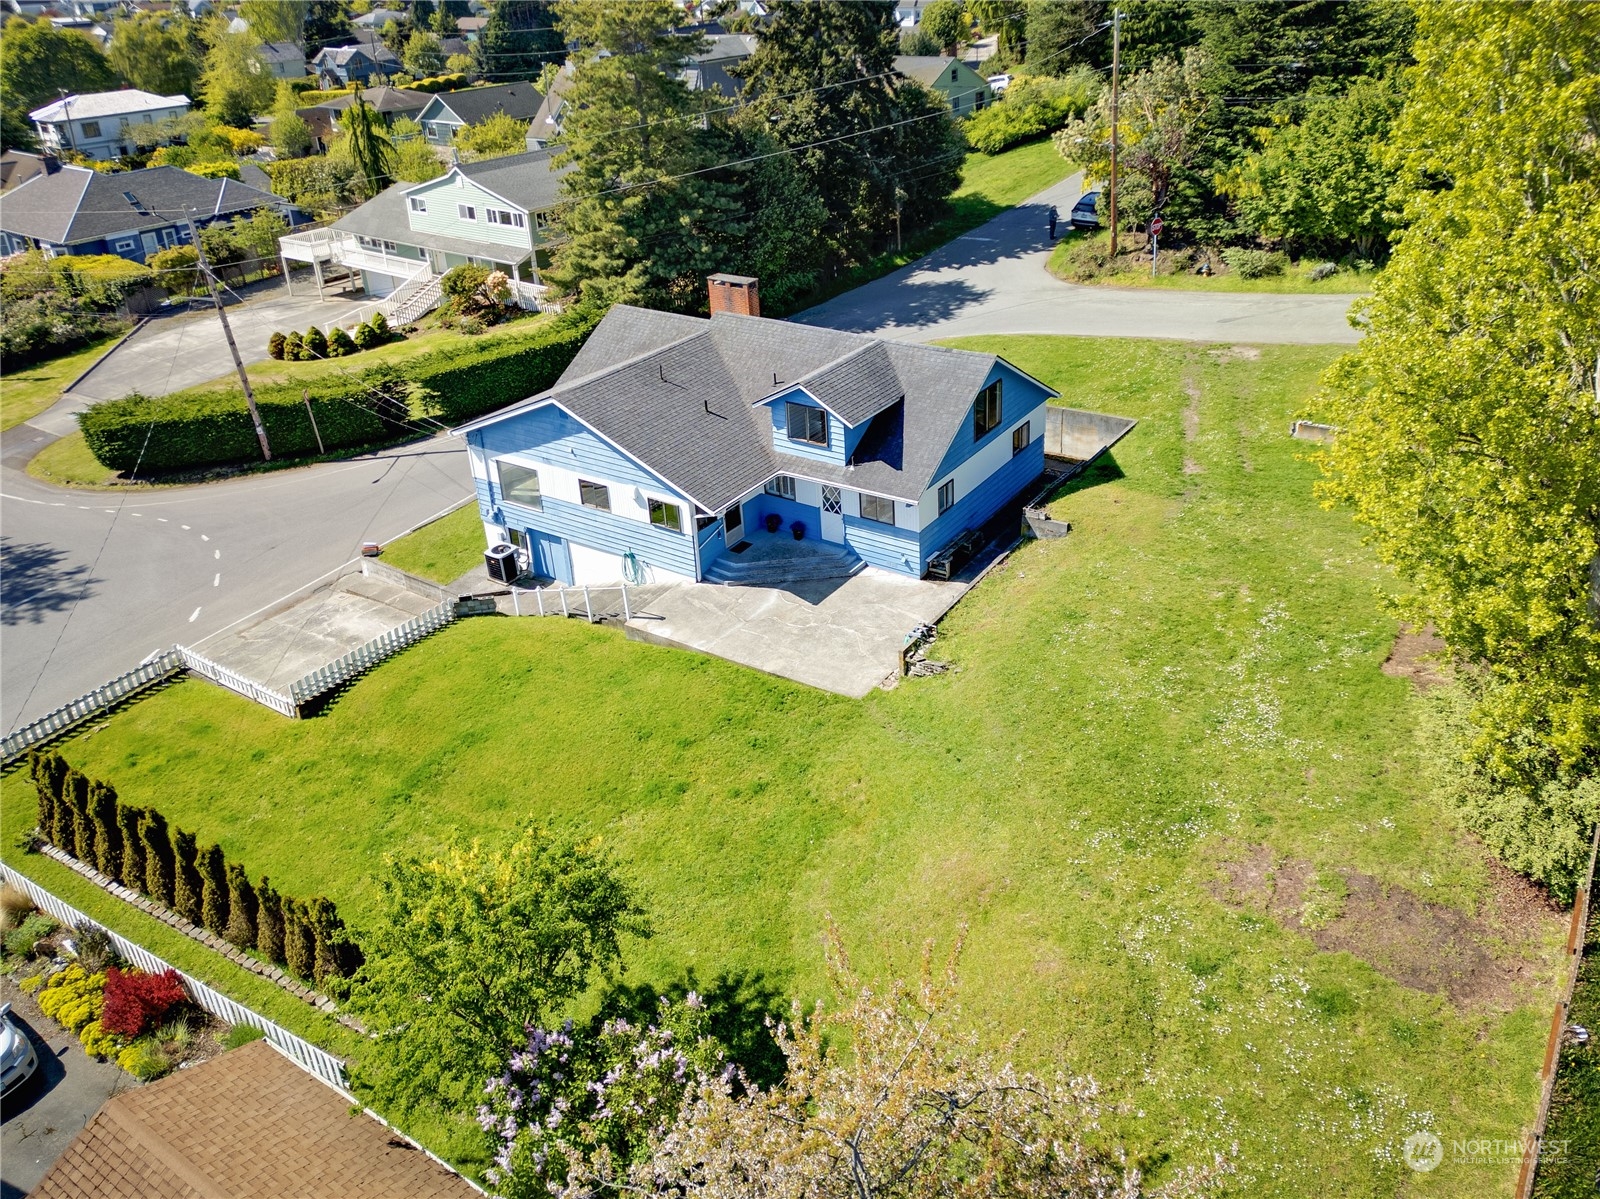 an aerial view of a house with yard swimming pool and outdoor seating